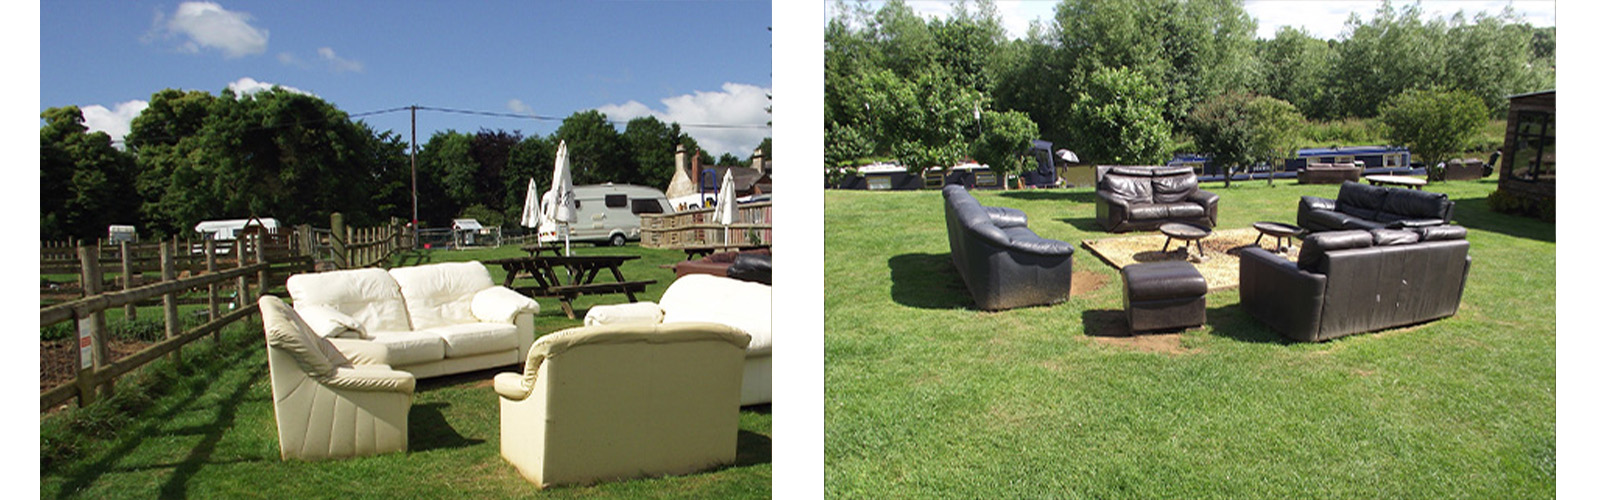 The Pig Place, Adderbury - campsite and moorings